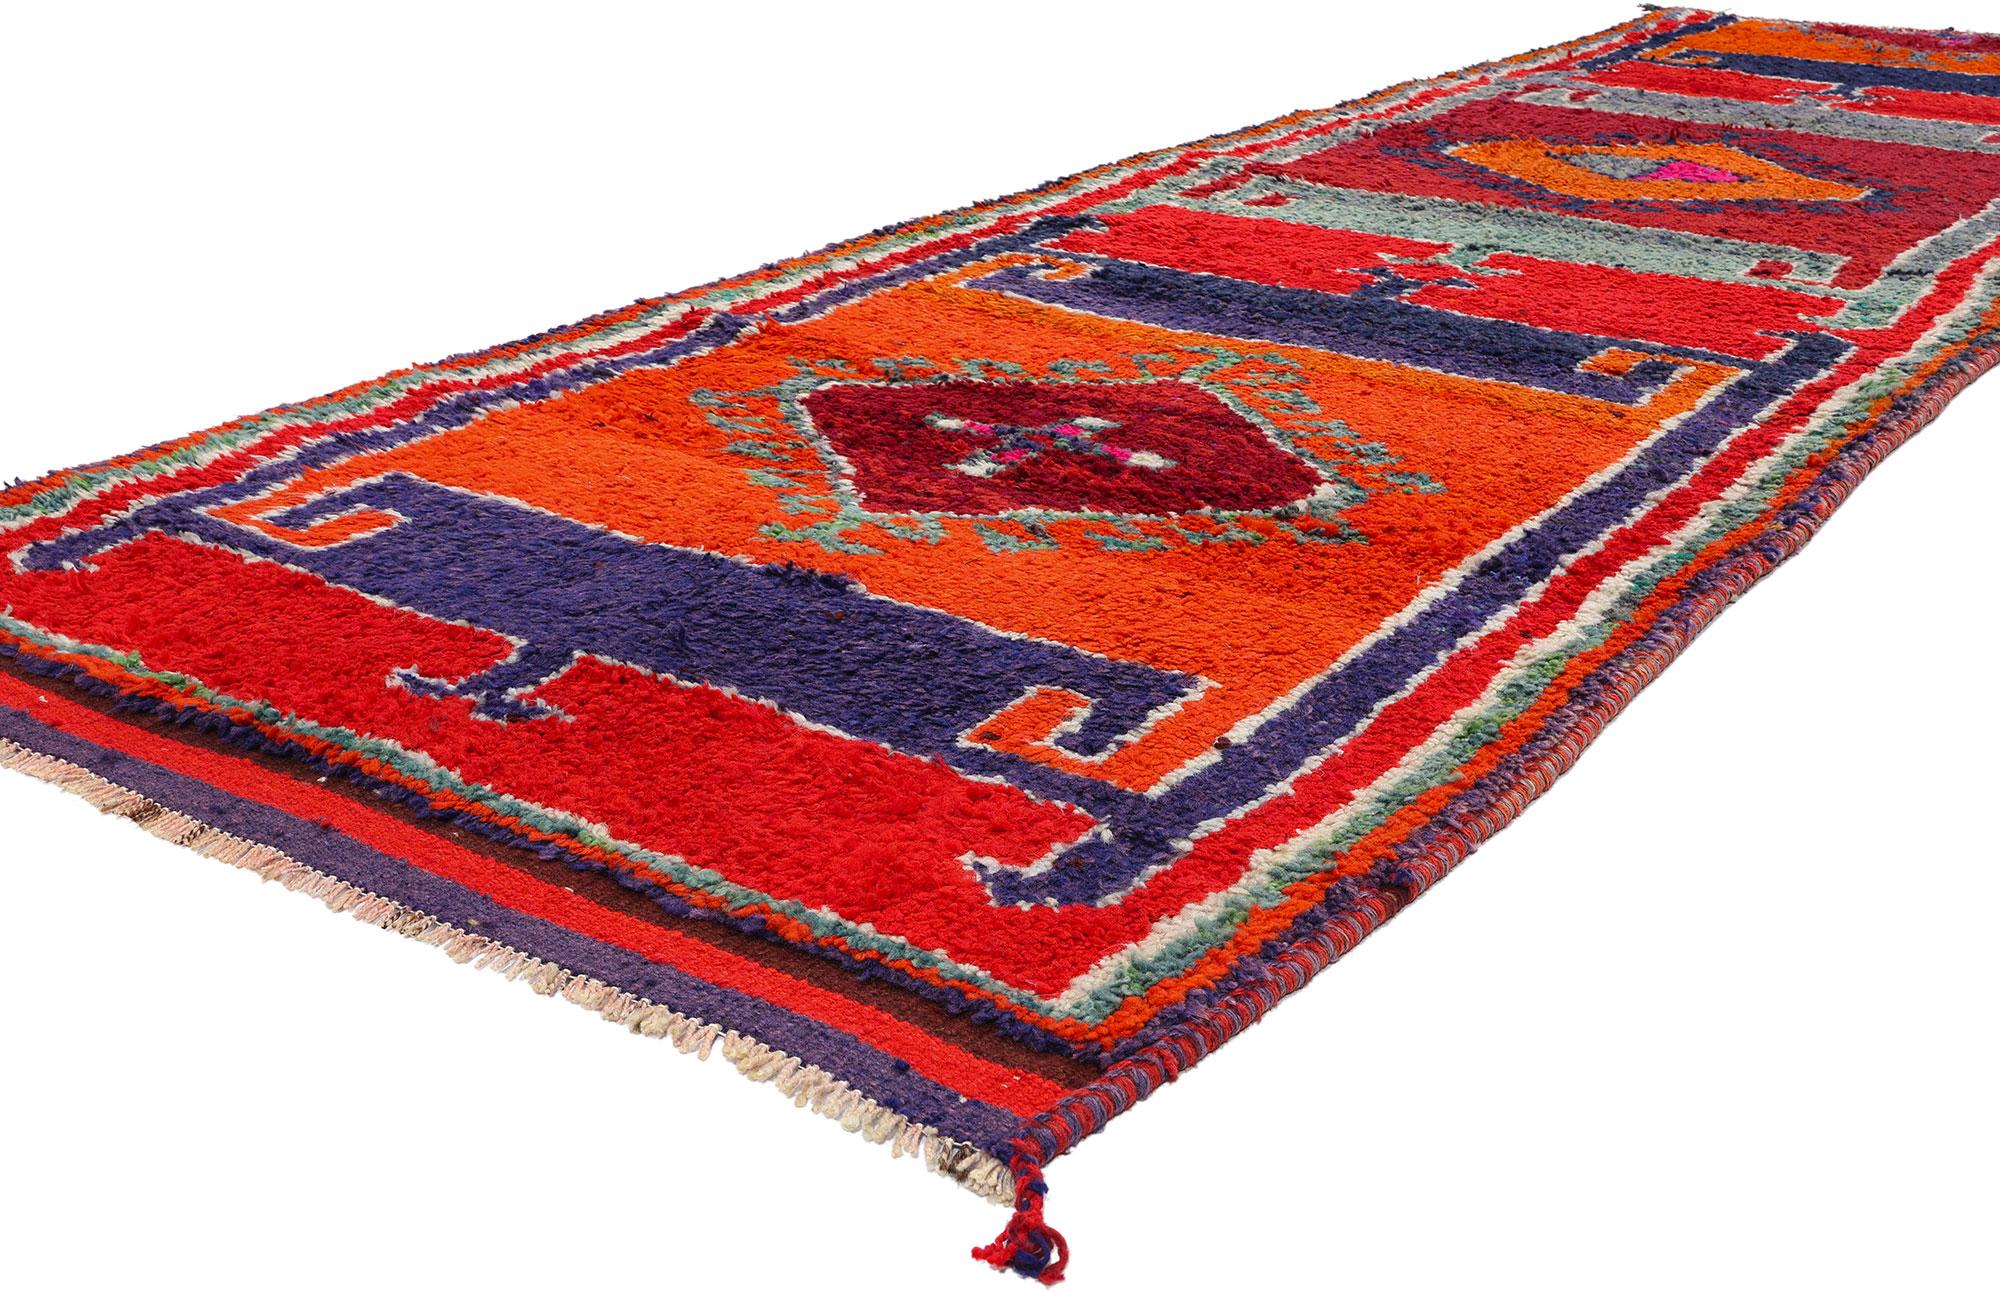 53906 Vintage Orange Kurdish Rug Runner, 03'08 x 12'00. Crafted with meticulous precision and unwavering dedication by Kurdish Herki tribes in eastern Turkey, particularly in the Hakkari province, Kurdish rugs are celebrated for their unparalleled